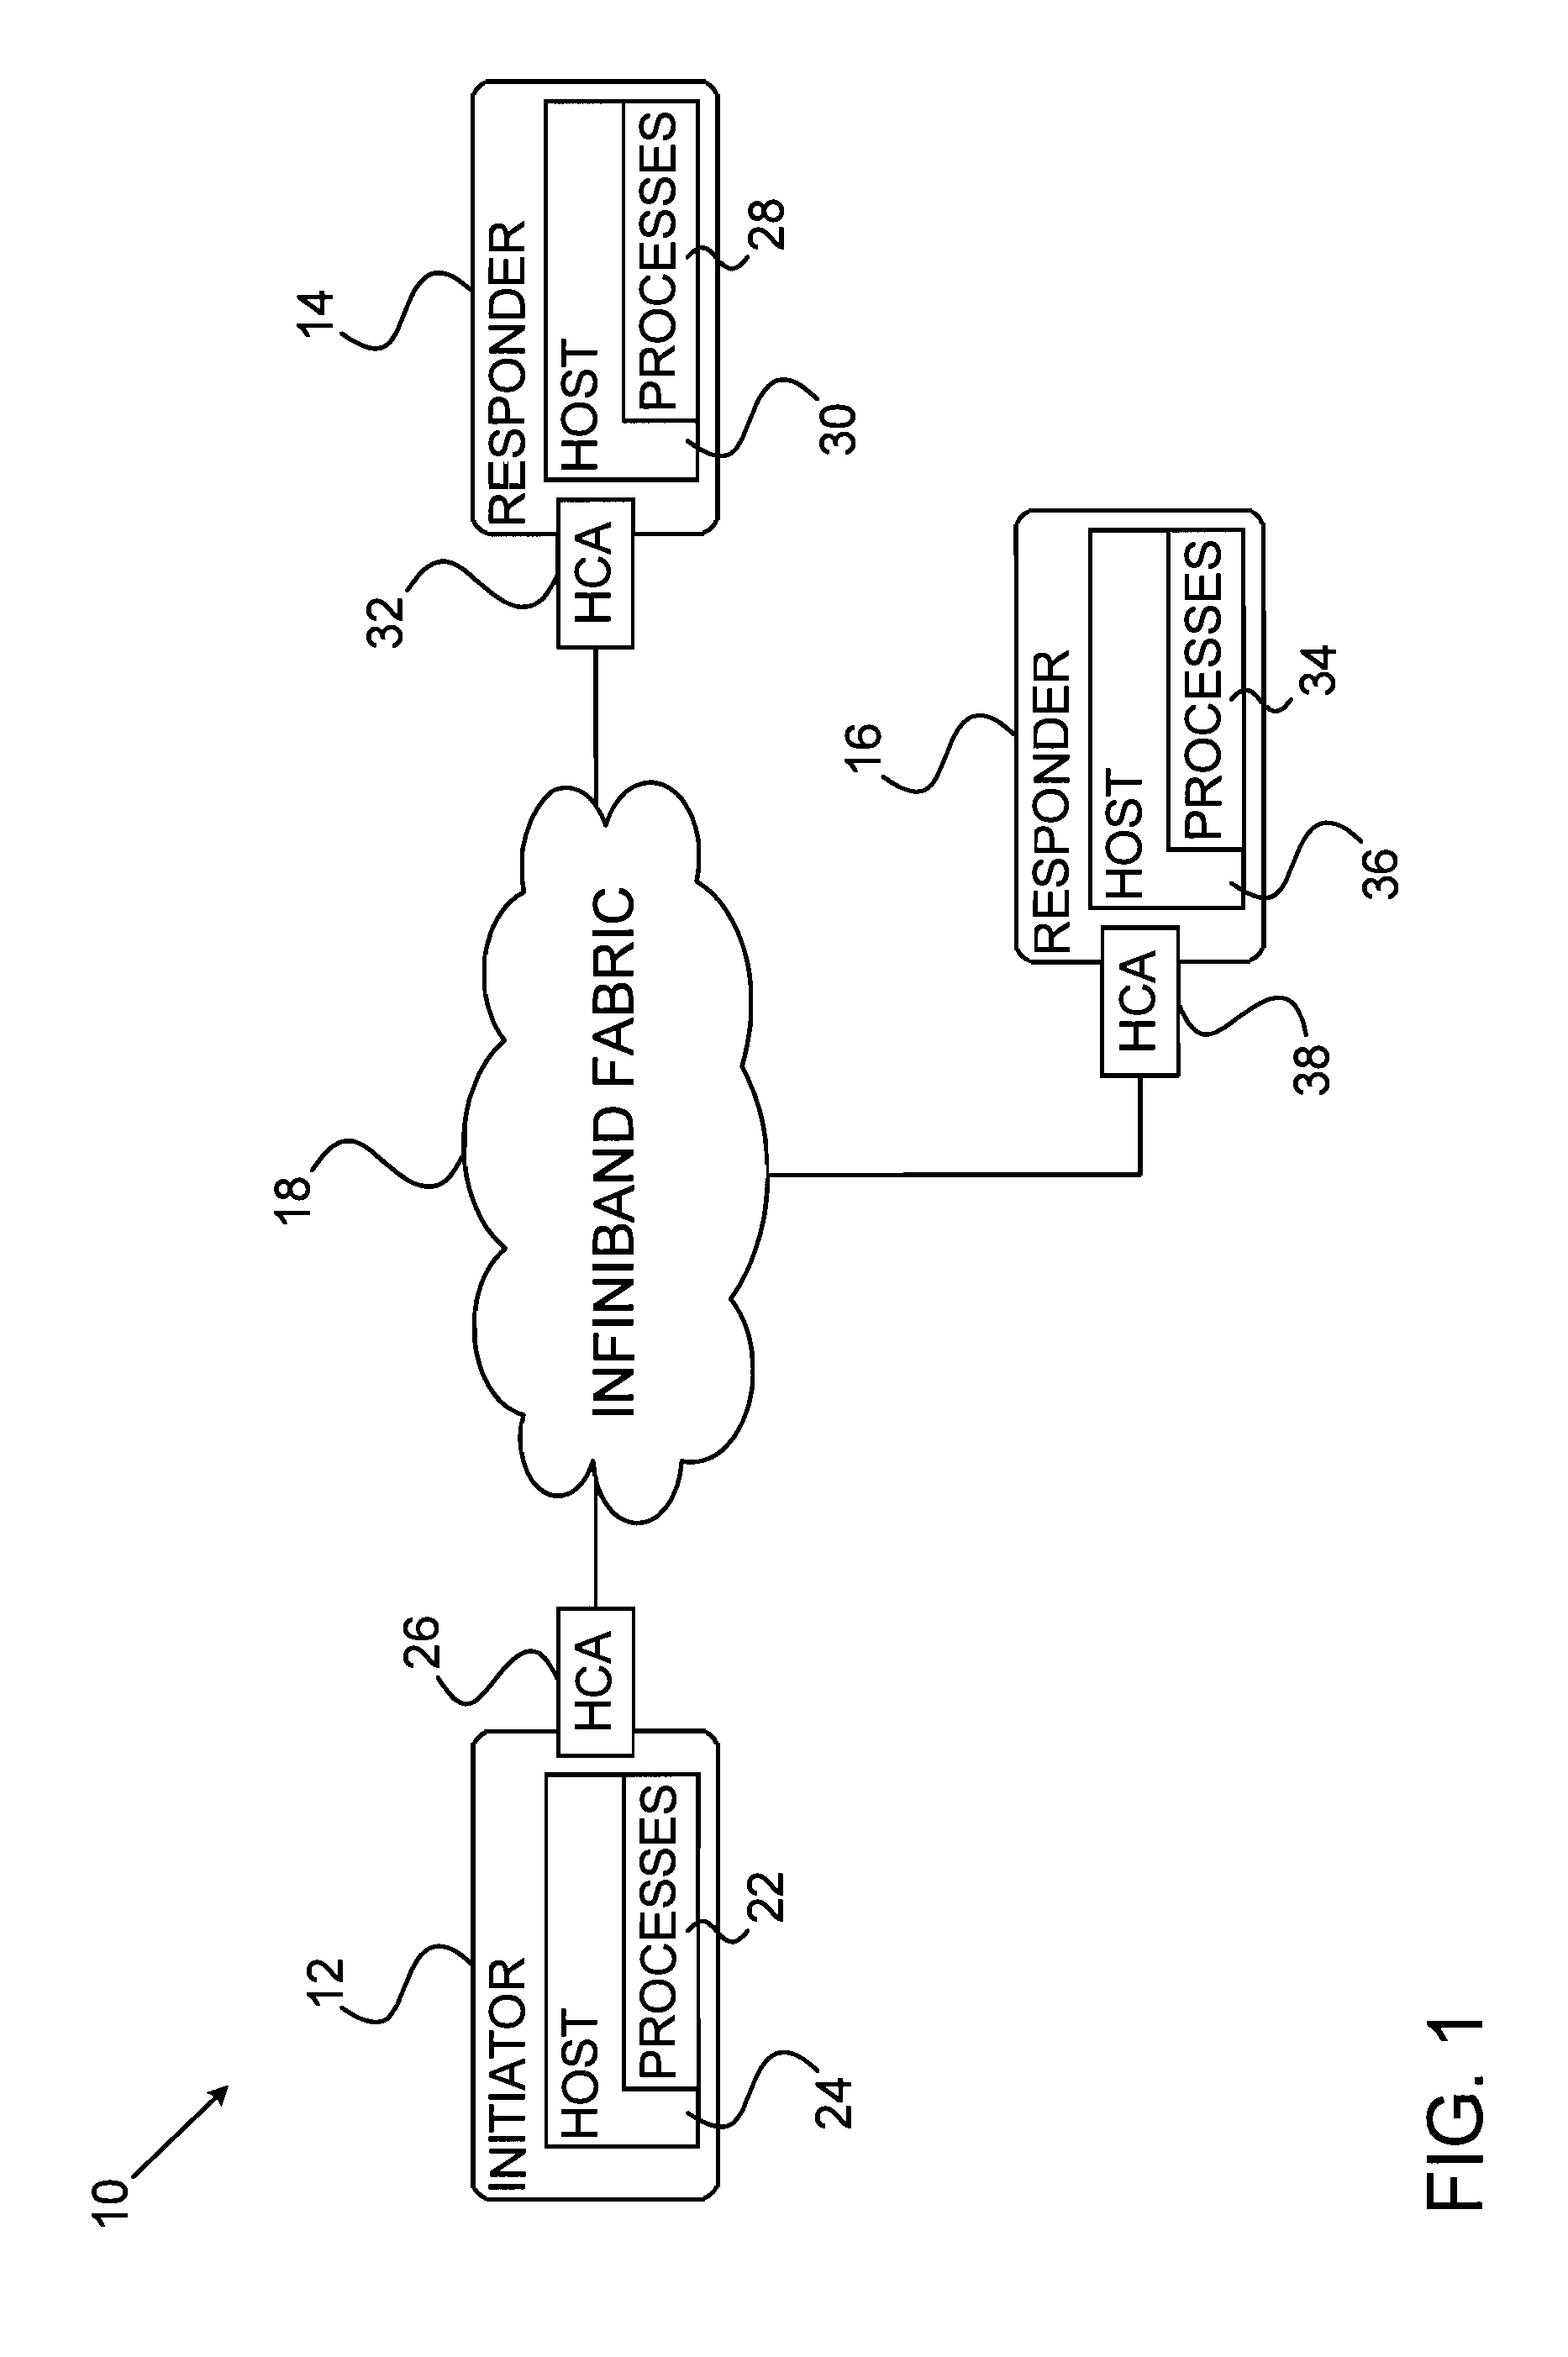 Dynamically-Connected Transport Service